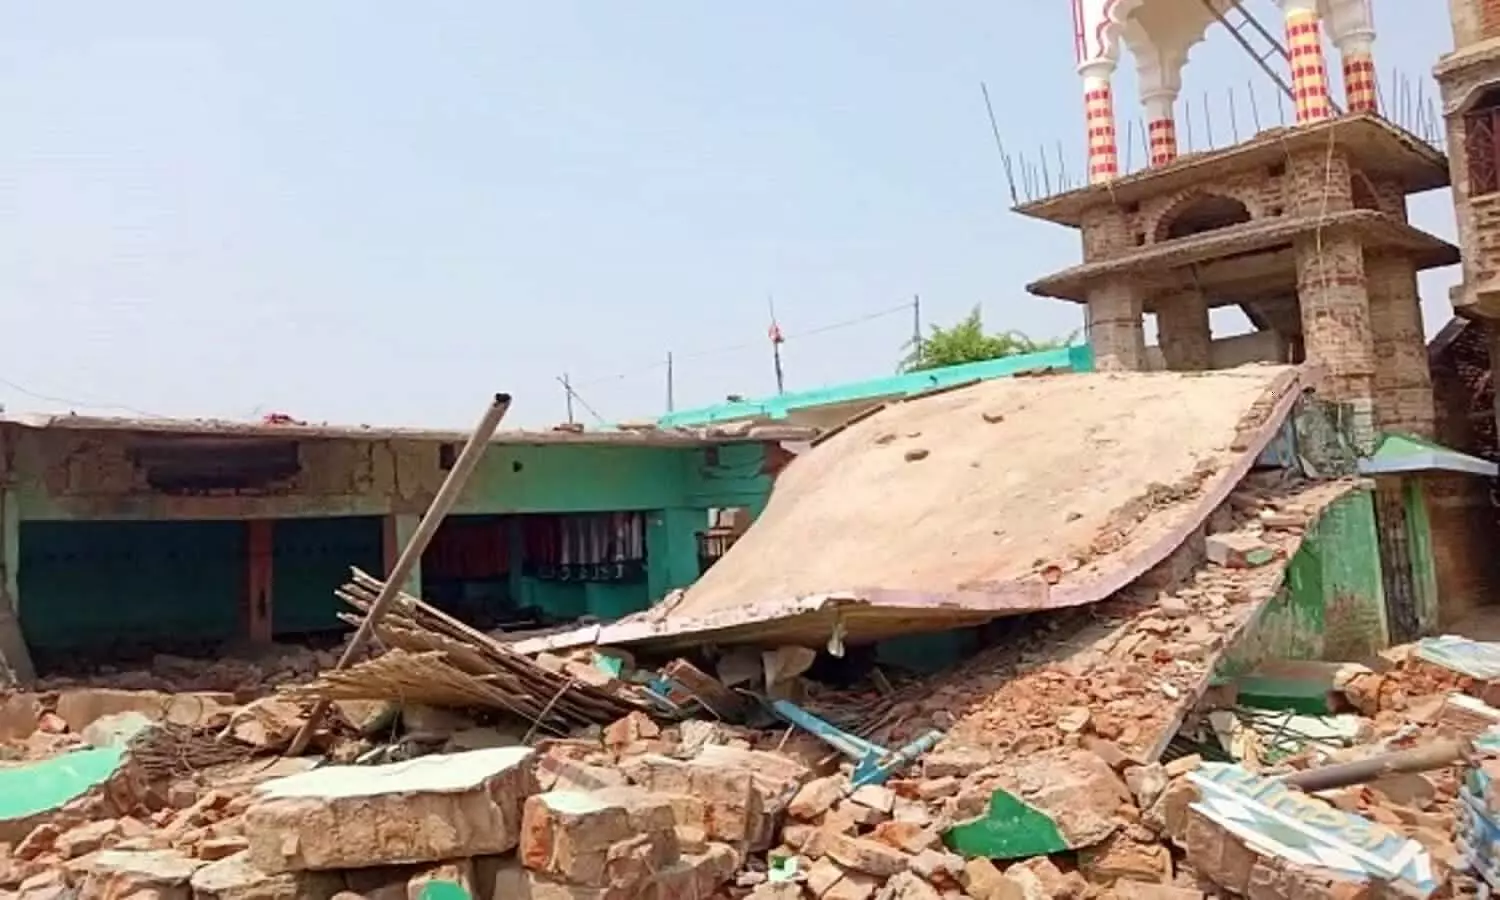 Big news from Bihar&#39;s Banka. There was an explosion near a mosque. The madrasa was destroyed before it was mounted. | Bomb Blast: बिहार में भीषण बम विस्फोट, मदरसे की उड़ी धज्जियां,